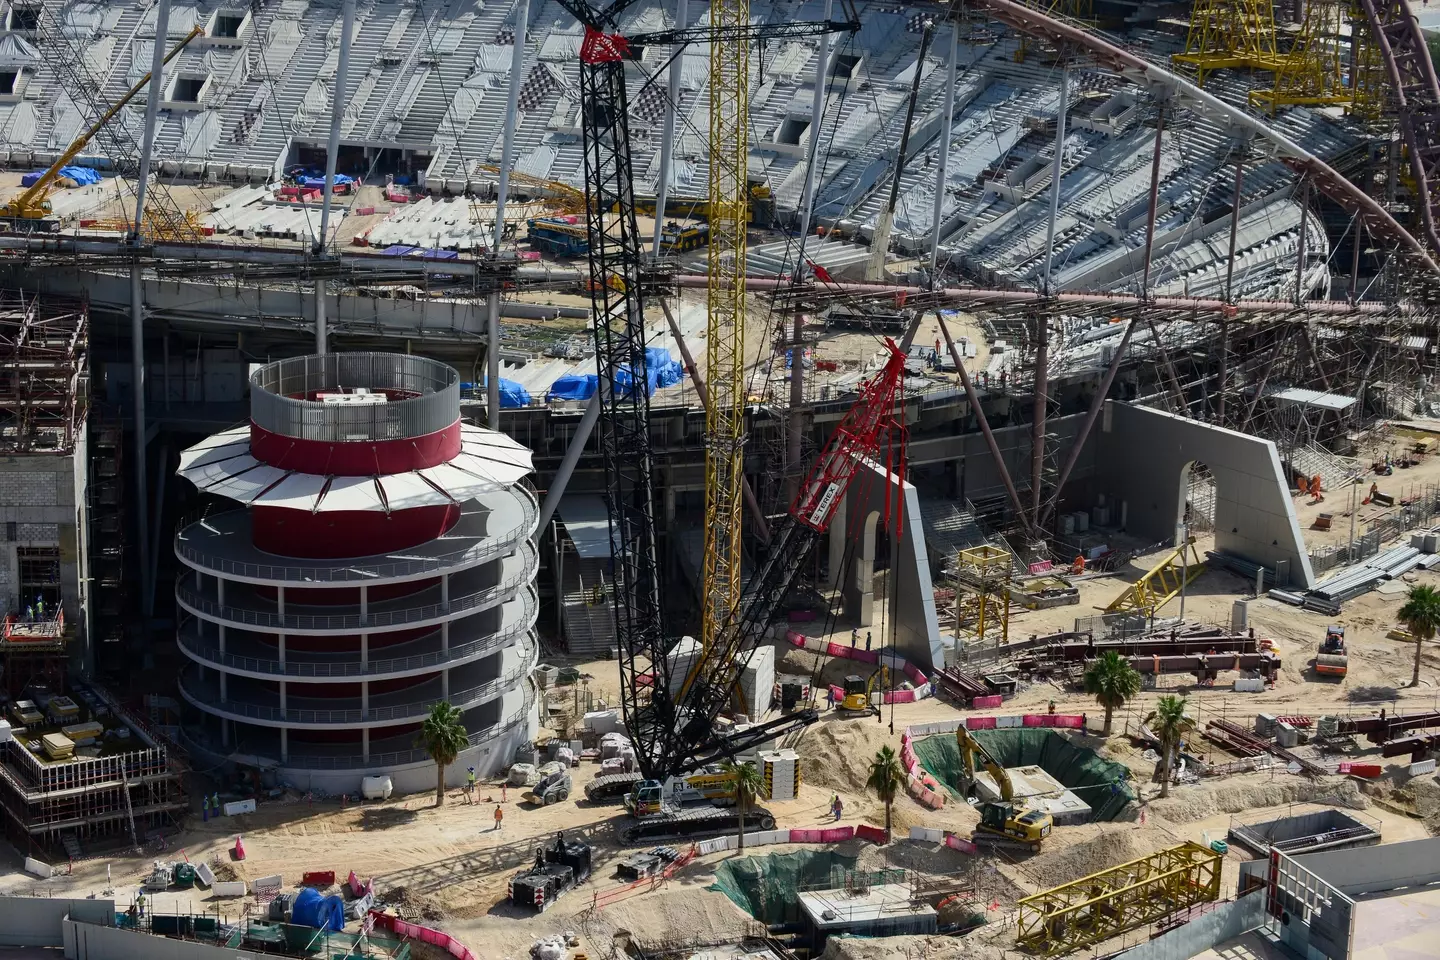 Qatar has already faced backlash over its constructing of the World Cup stadiums.